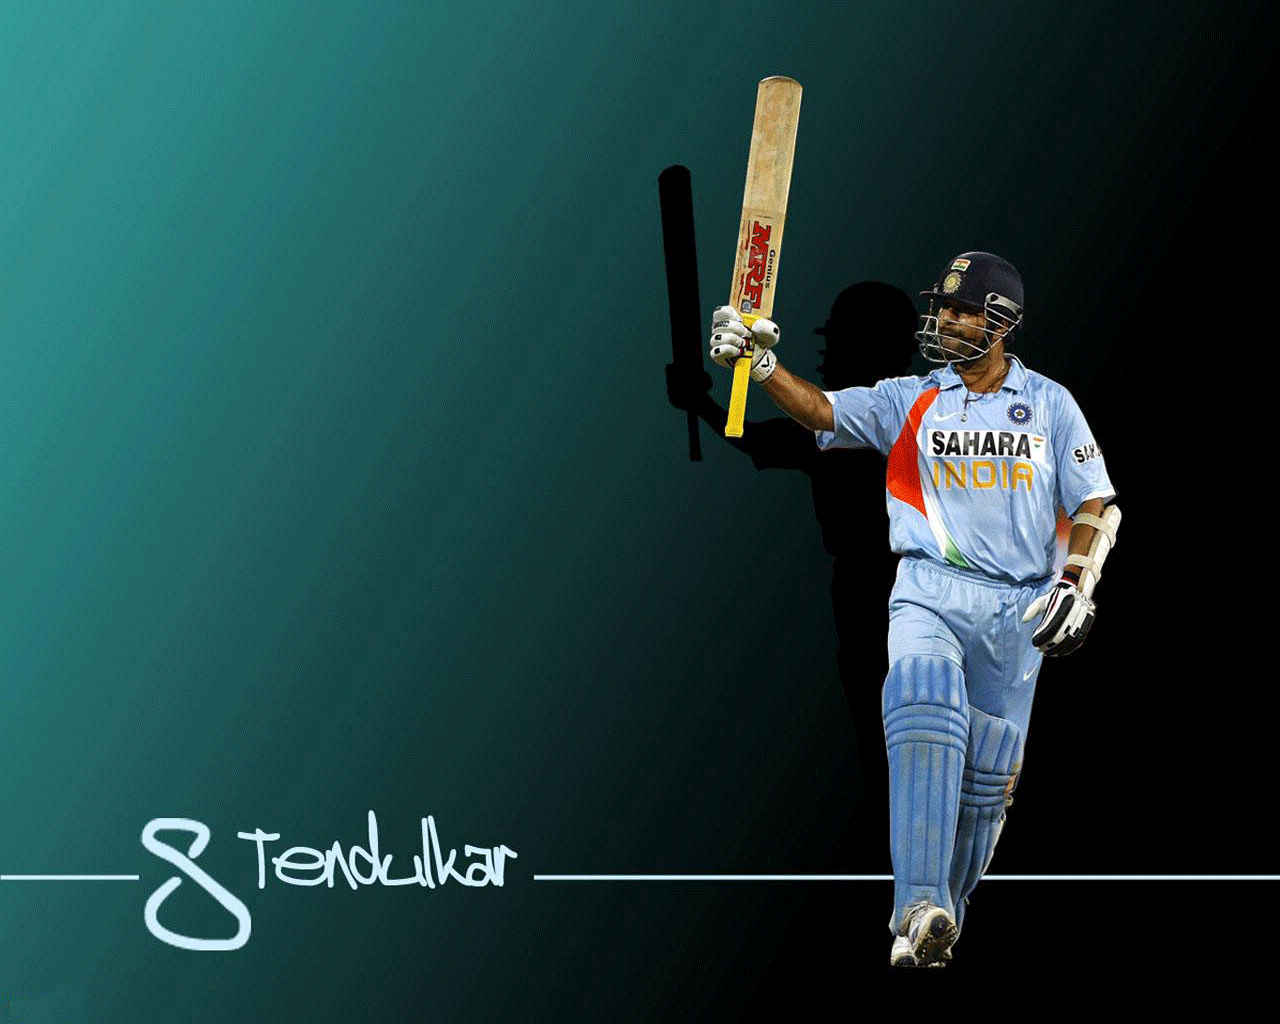 Sachin Tendulkar Hd Wallpapers - HD Wallpapers and Pictures